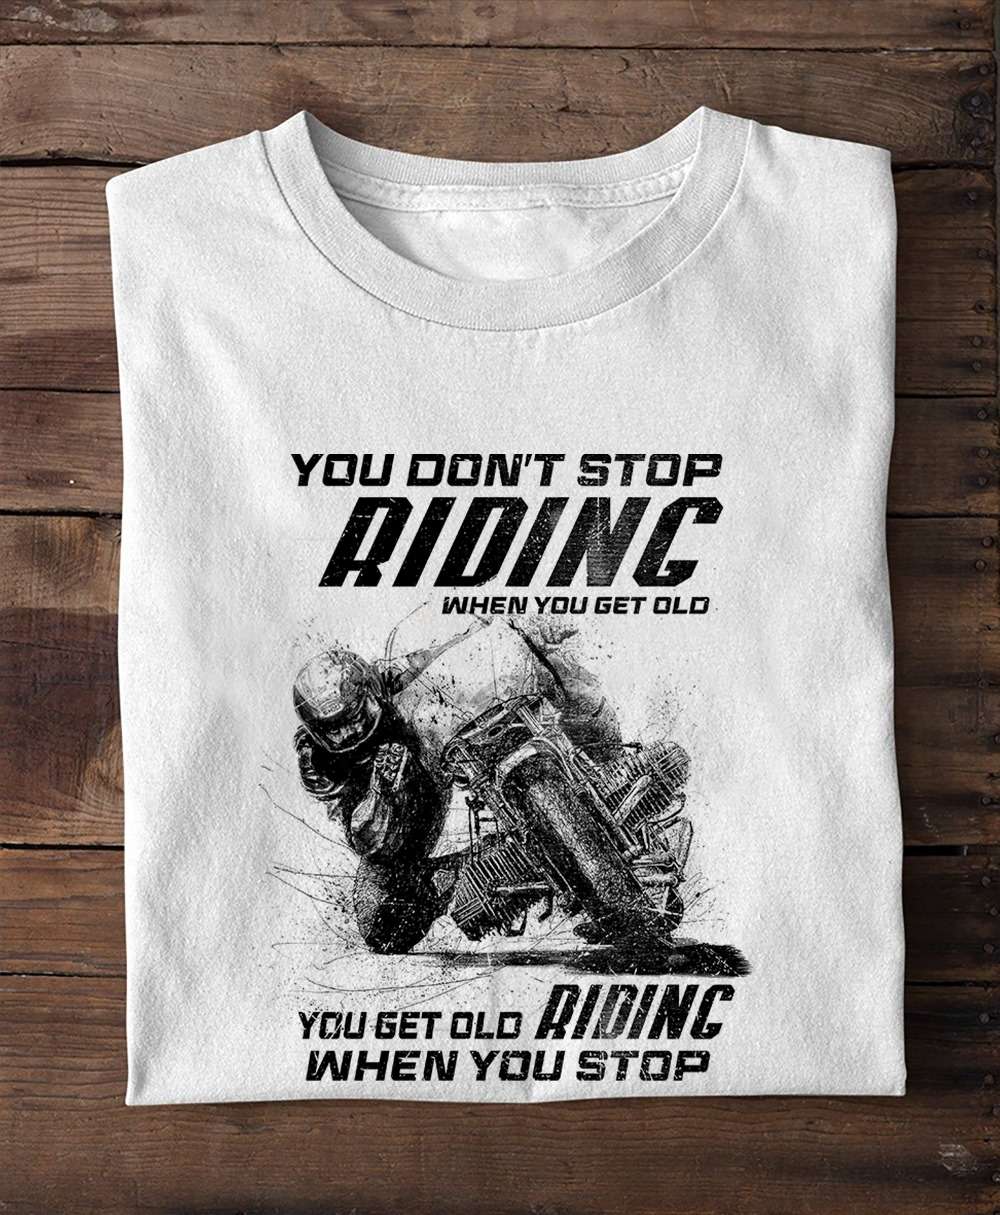 You don't stop riding when you get old - You get old when you stop riding, motorcycle rider